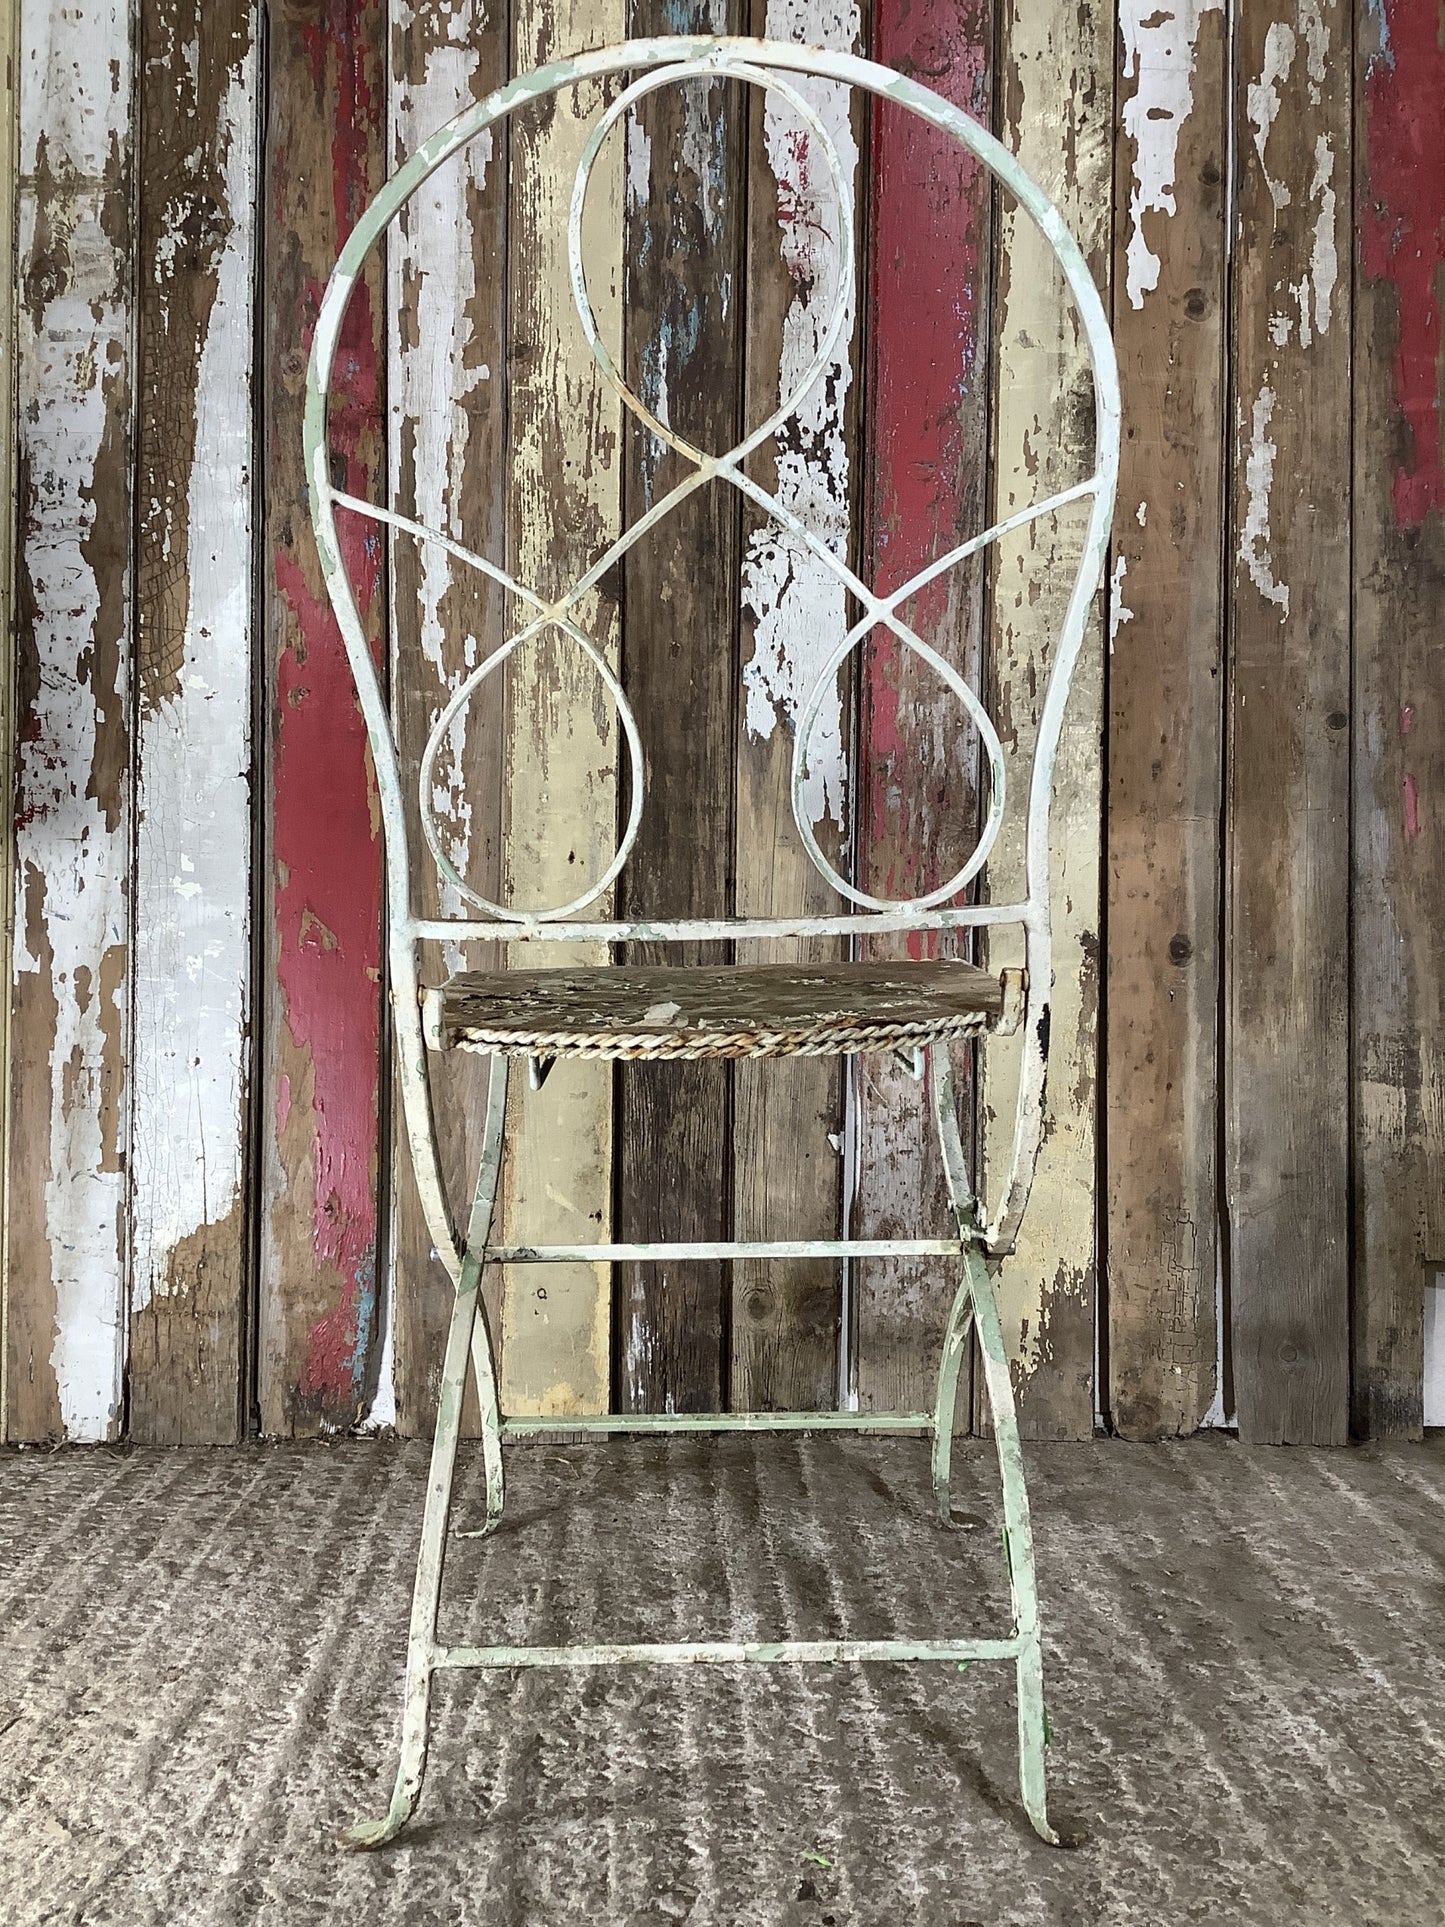 Rustic Old Painted Pair Of Steel Metal Foldable Garden Chairs 3'0"H